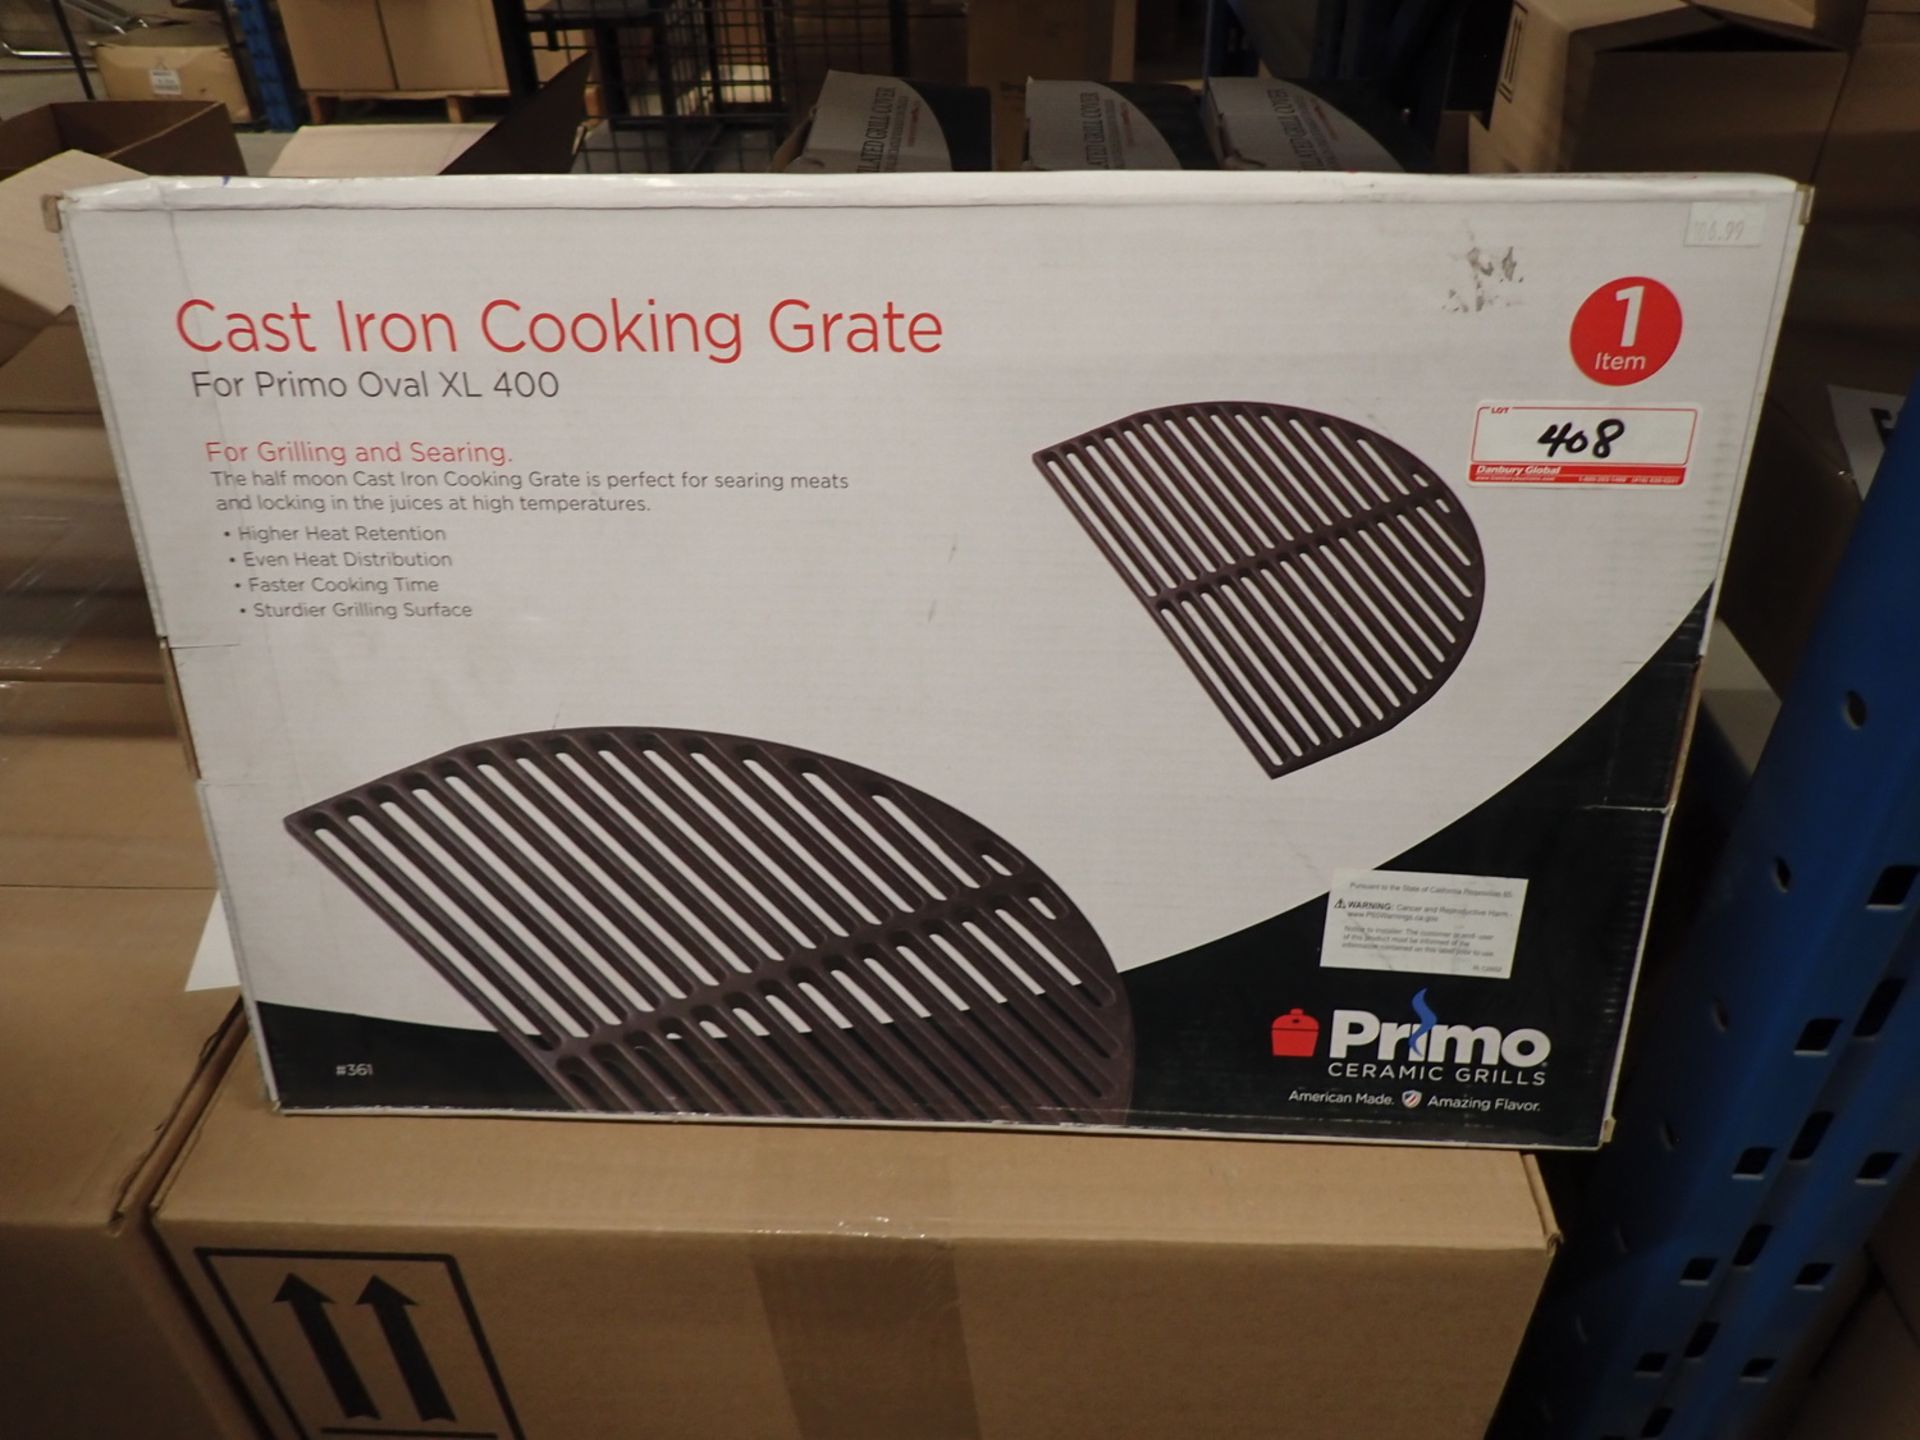 UNITS - PRIMO CAST IRON COOKING GRATE FOR OVAL XL 400 (RETAIL $106.99 EA)